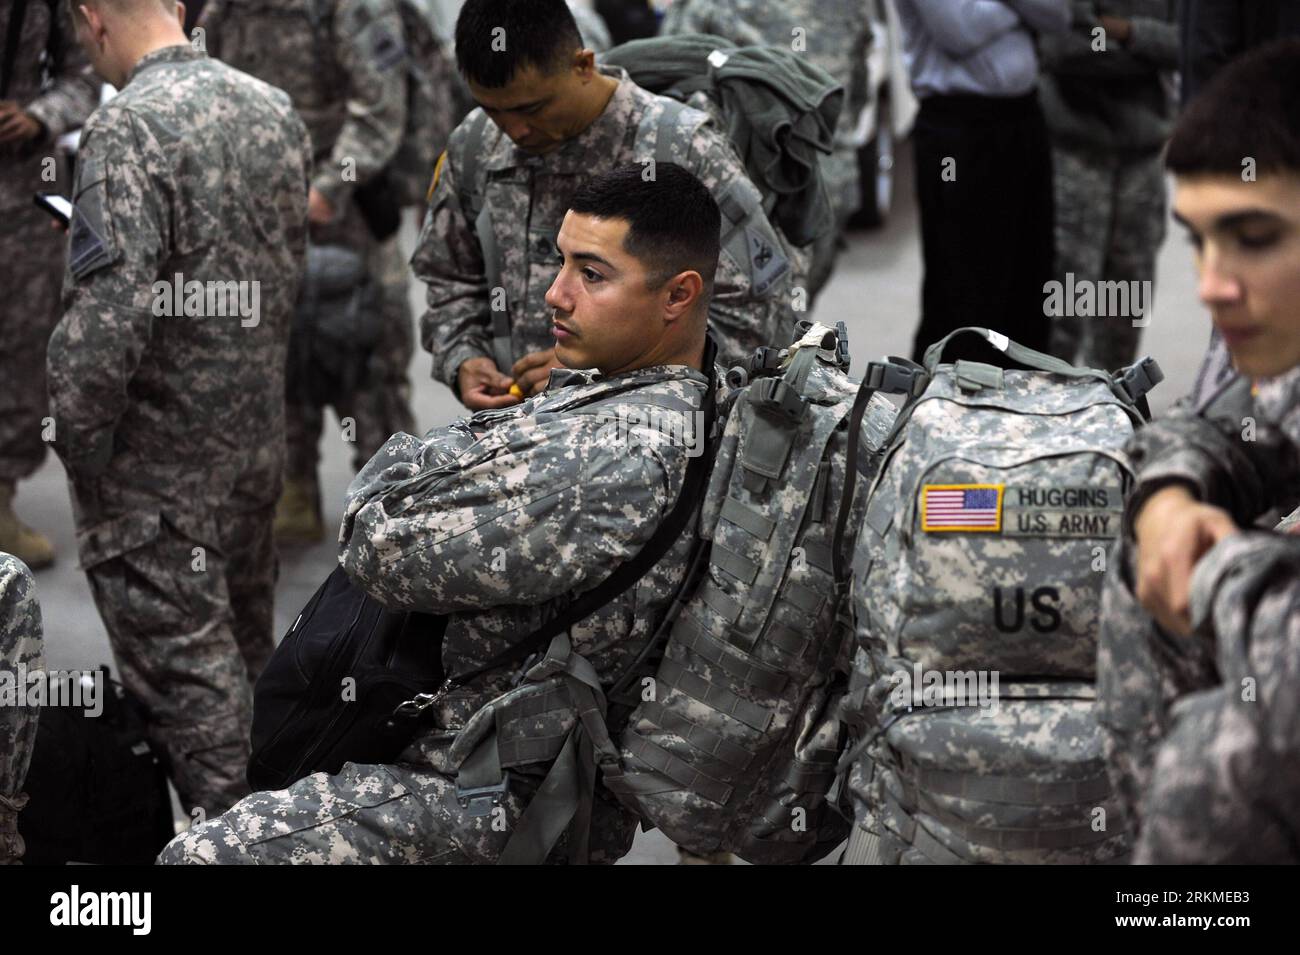 Bildnummer: 56693224  Datum: 12.12.2011  Copyright: imago/Xinhua (111213) -- EL PASO (TEXAS), Dec. 13, 2011 (Xinhua) -- A soldier from 4th Brigade, 1st Armored Division, US Army, rests after arriving at Fort Bliss in El Paso of Texas, the United States, Dec. 12, 2011. Some 270 soldiers of 4th Brigade returned from Iraq and reunited with their family on Monday. U.S. military forces are to pull out completely from Iraq by the end of 2011, according to a security pact, named Status of Forces Agreement (SOFA), signed late in 2008 between Baghdad and Washington. (Xinhua/Zhang Jun)(zcc) U.S.-EL PASO Stock Photo